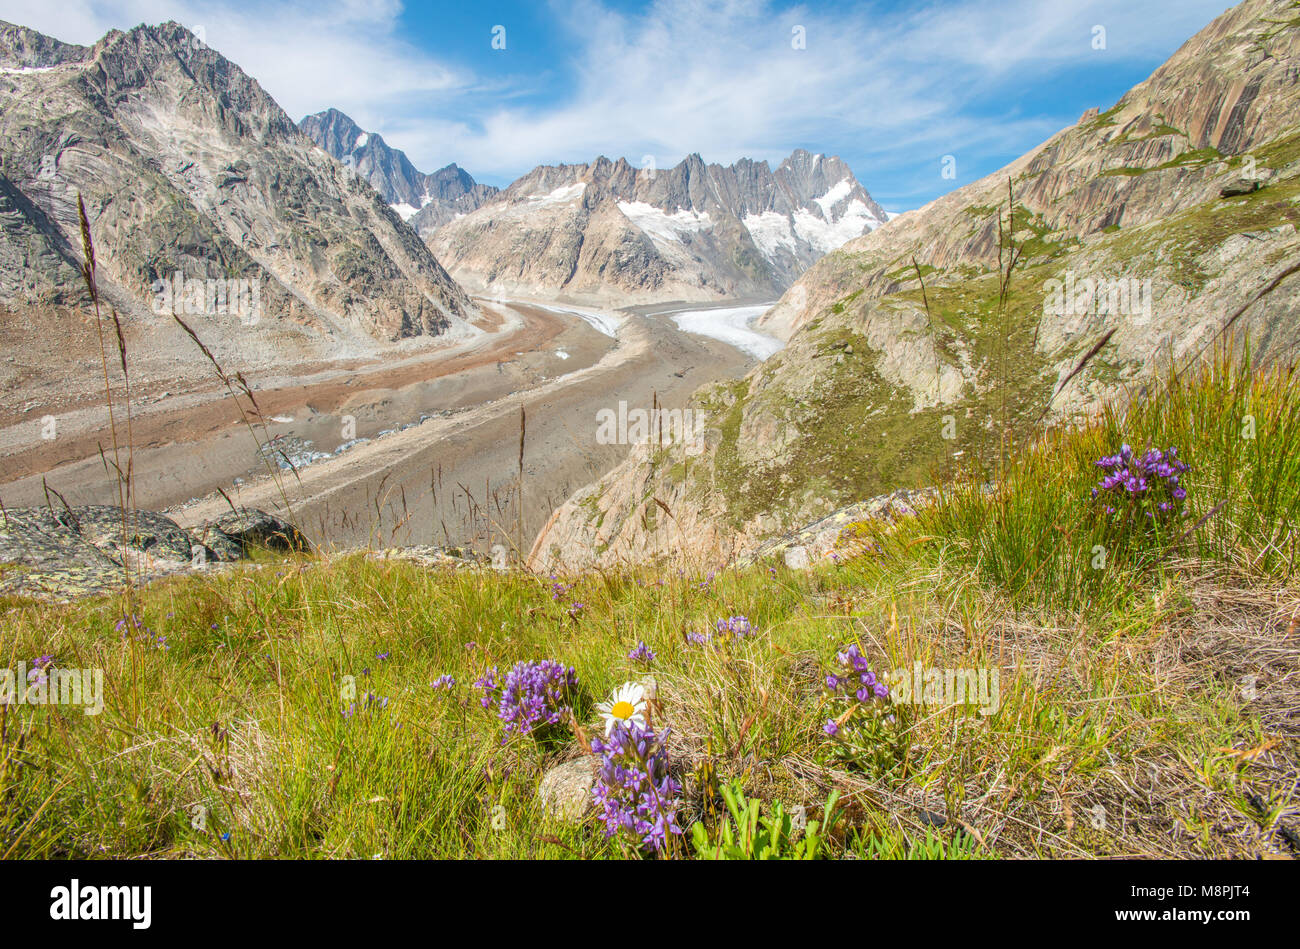 Amazing views of Grimsel glacier, valley and glacier tongue, surrounded by mountain walls. Colorful flowers, summer hiking in Swtizerland. Stock Photo